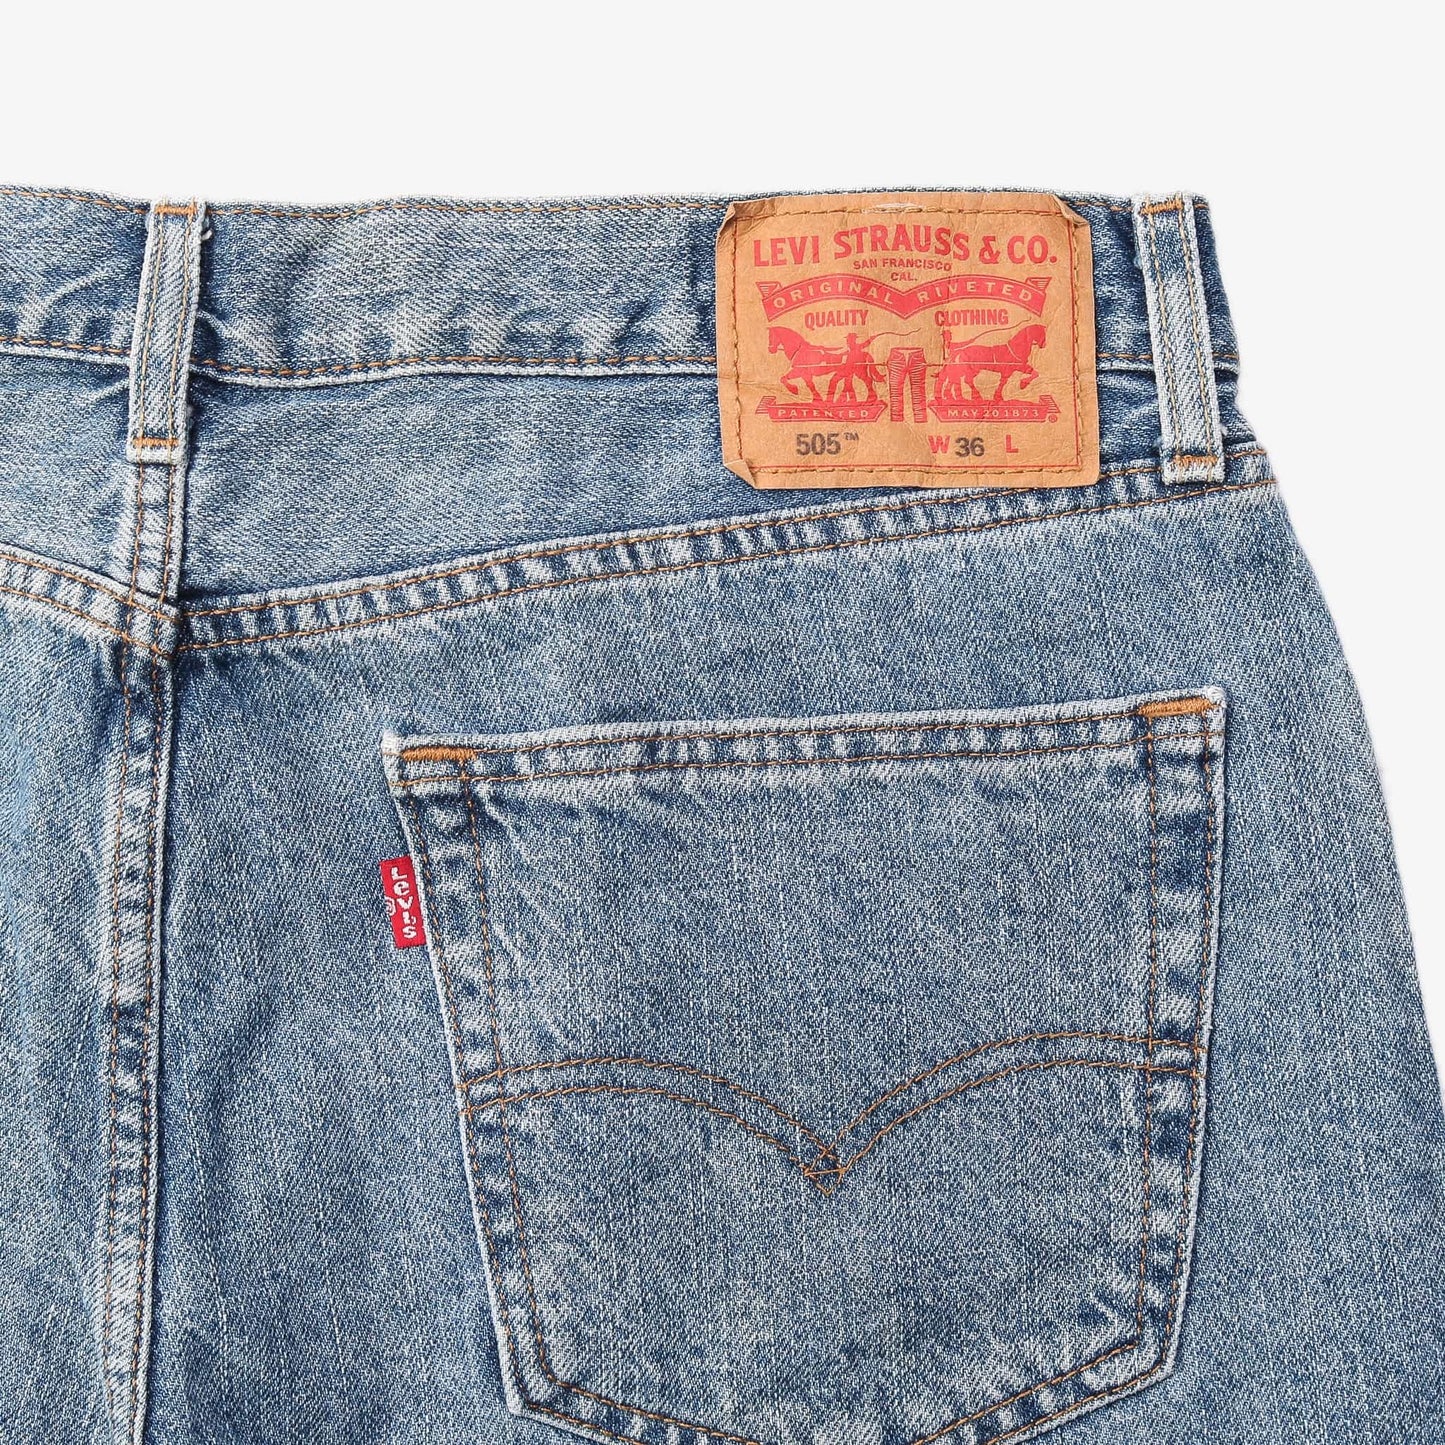 Vintage 505 Shorts - 36" - American Madness